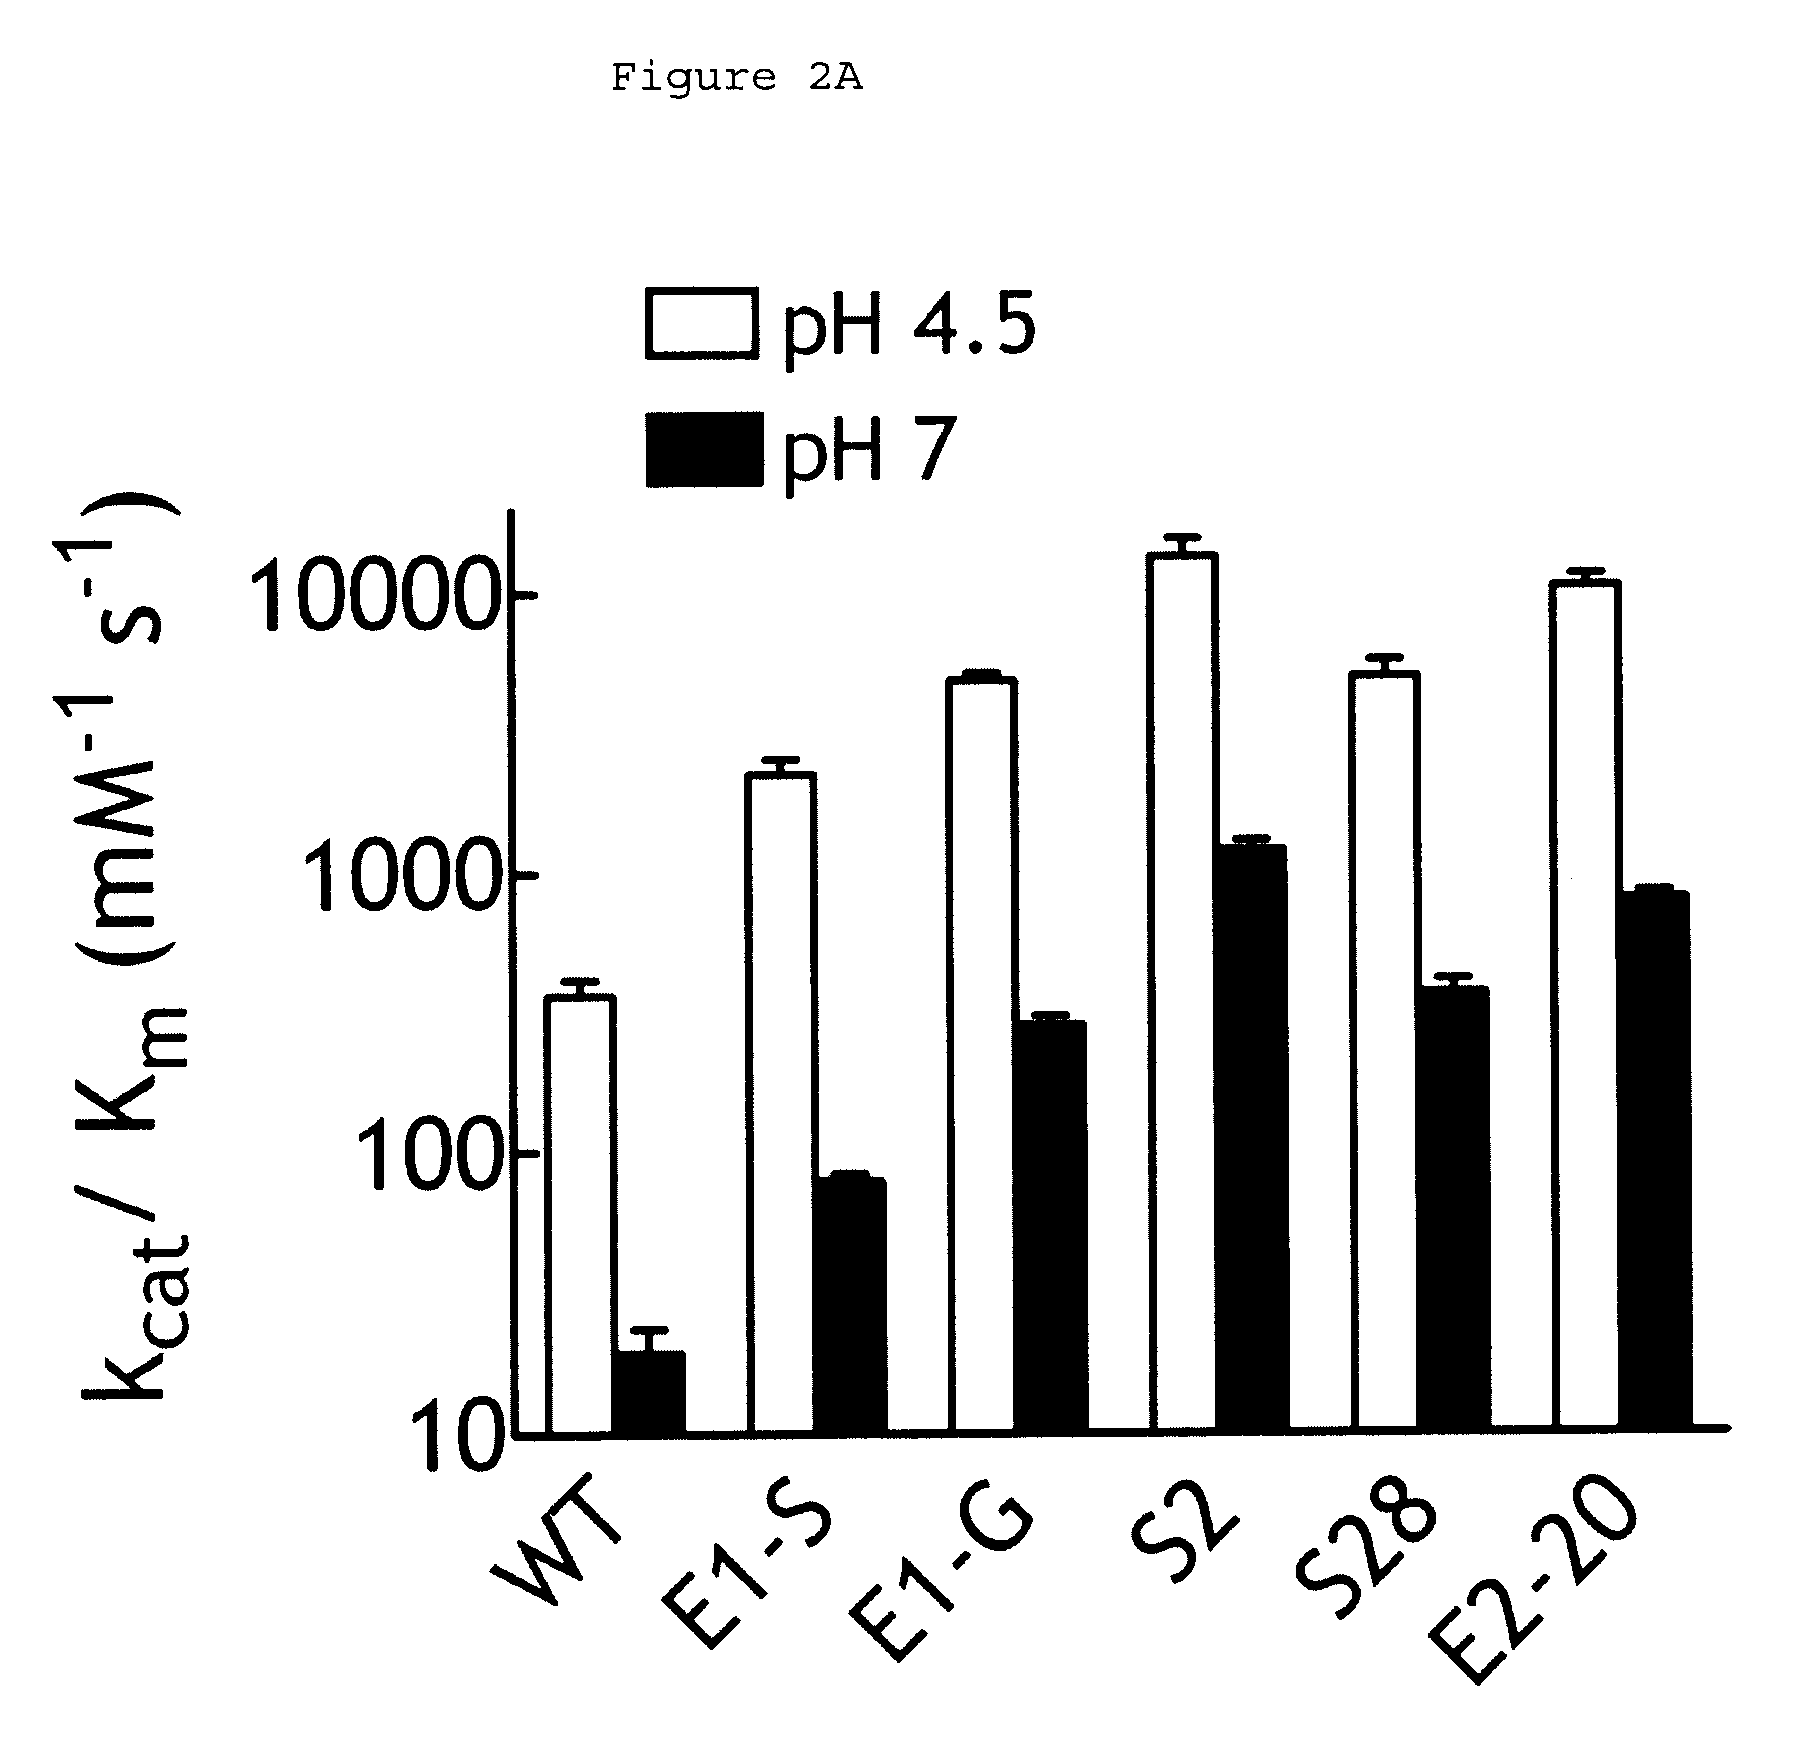 Human beta-glucuronidase mutants with elevated enzymatic activity under physiological conditions and method for identifying such